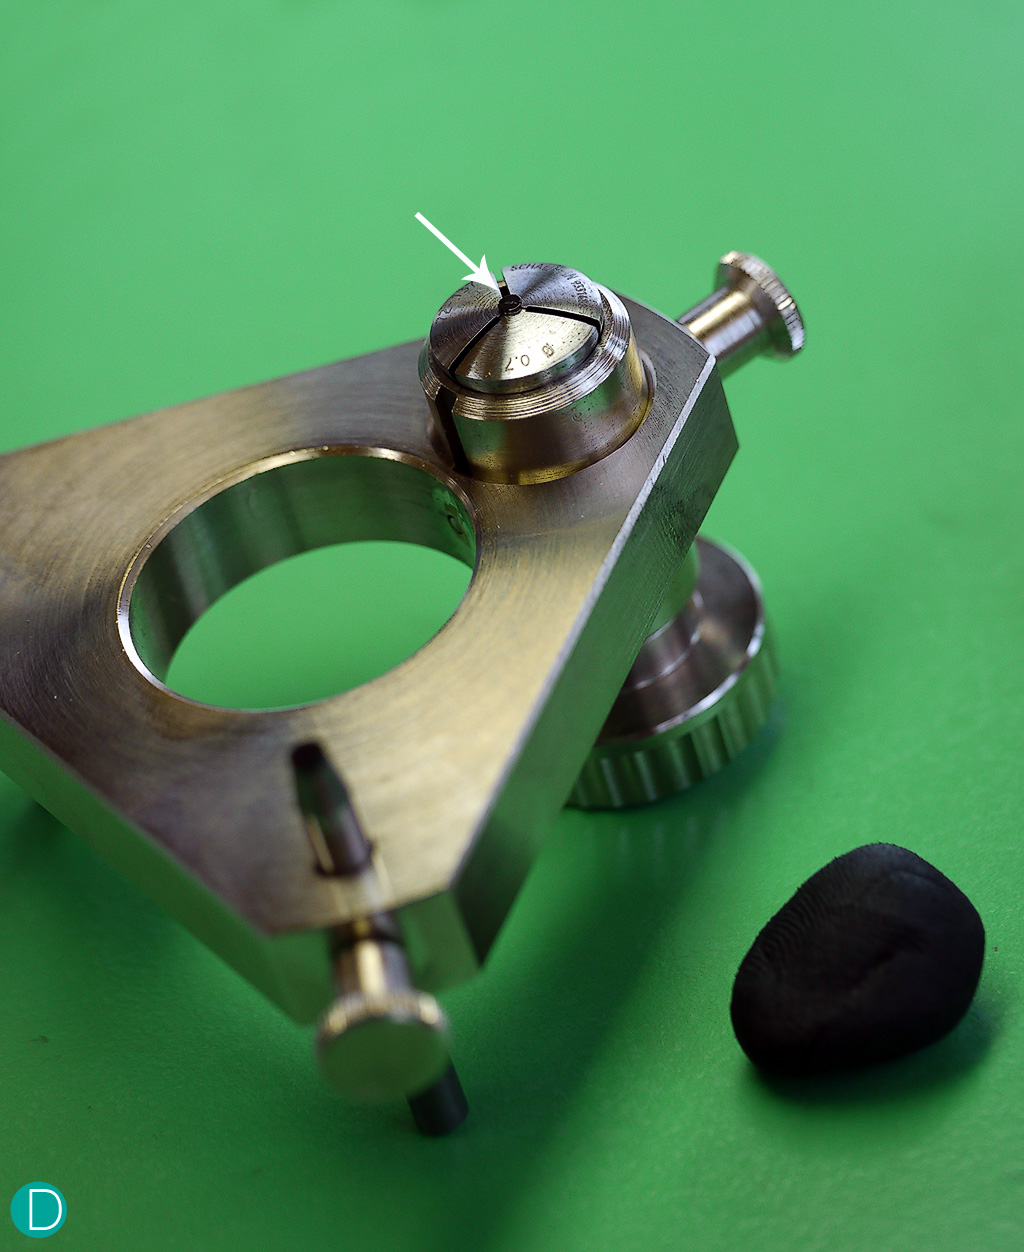 Even the tools used to hold the components are made in-house in Greubel-Forsay.In the photograph, the tripod tool is used to hold one single screw securely. The tripod legs are used to ensure the top of the screw which is the target for polishing is perfectly level, before the manual polishing process begins.